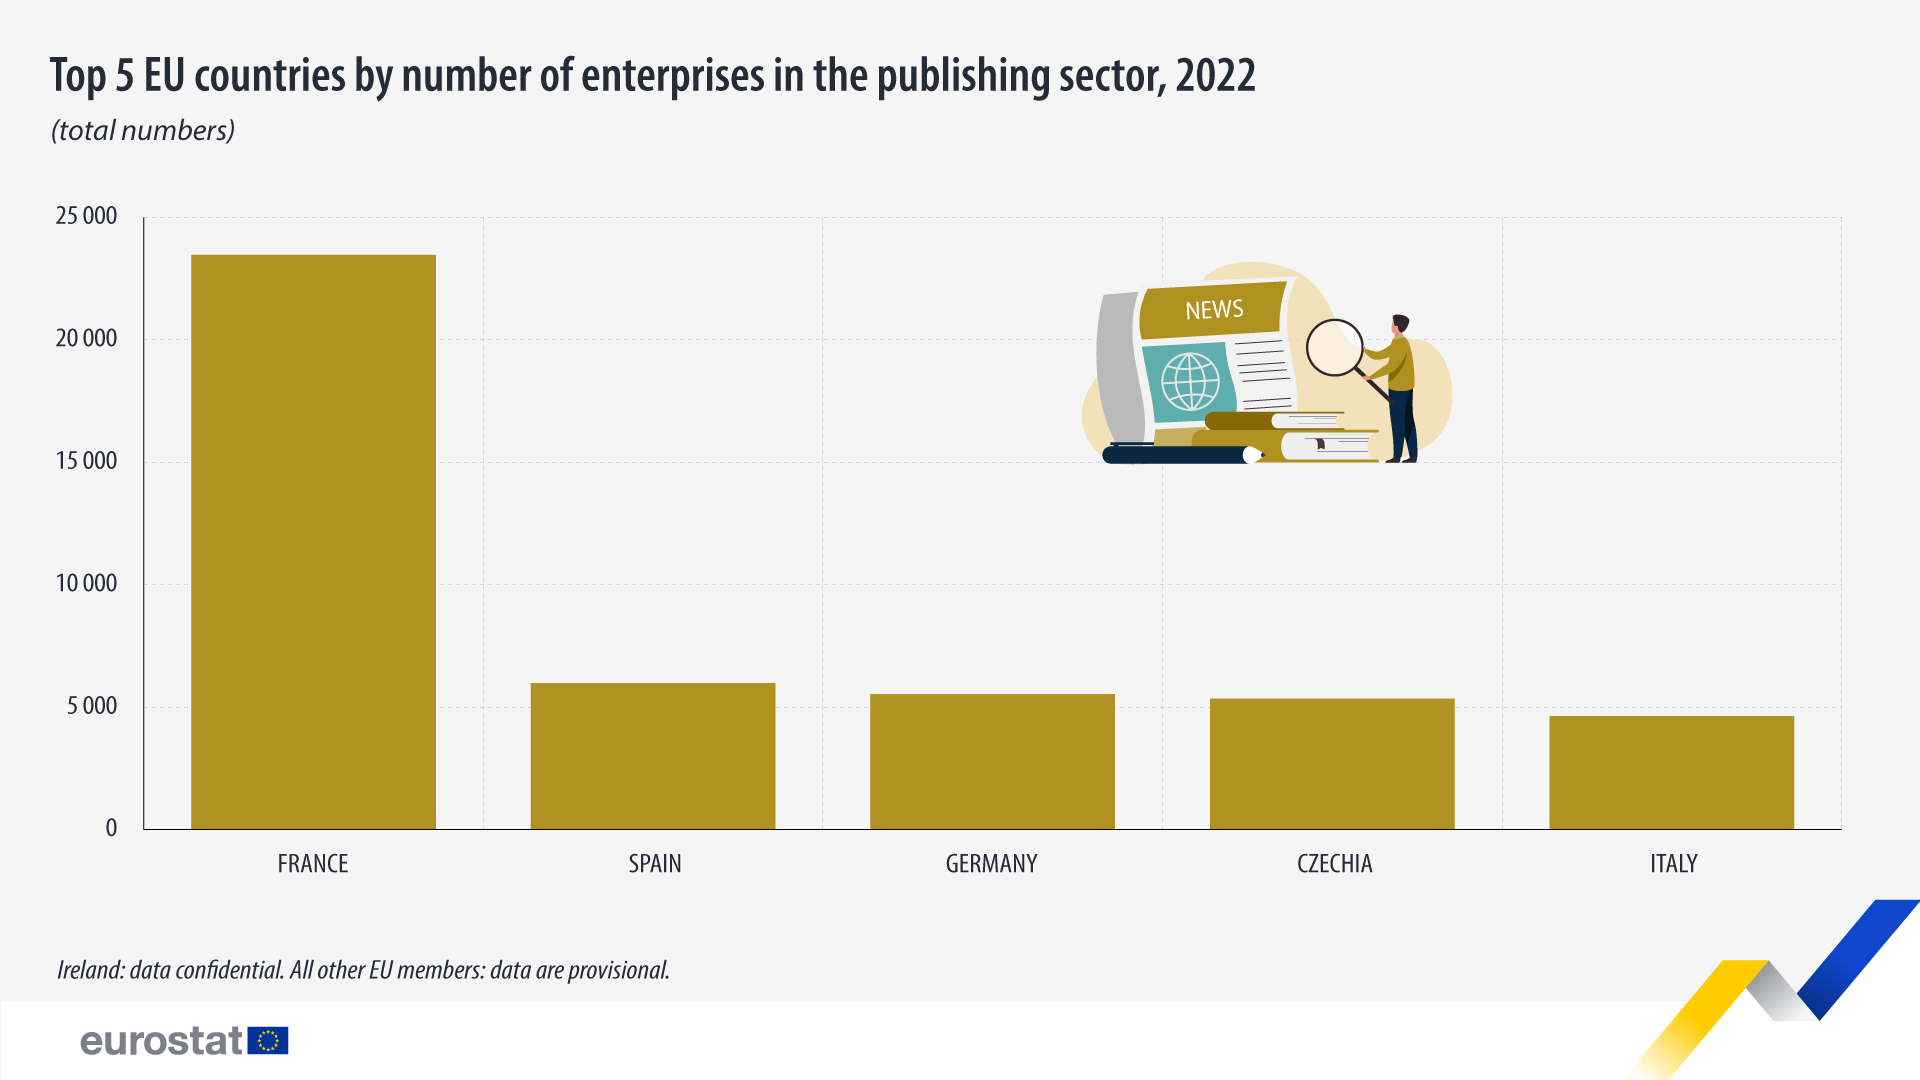 Top 5 EU countries by number of enterprises in the publishing sector, total numbers, 2022. Bar chart. See link to full dataset below.